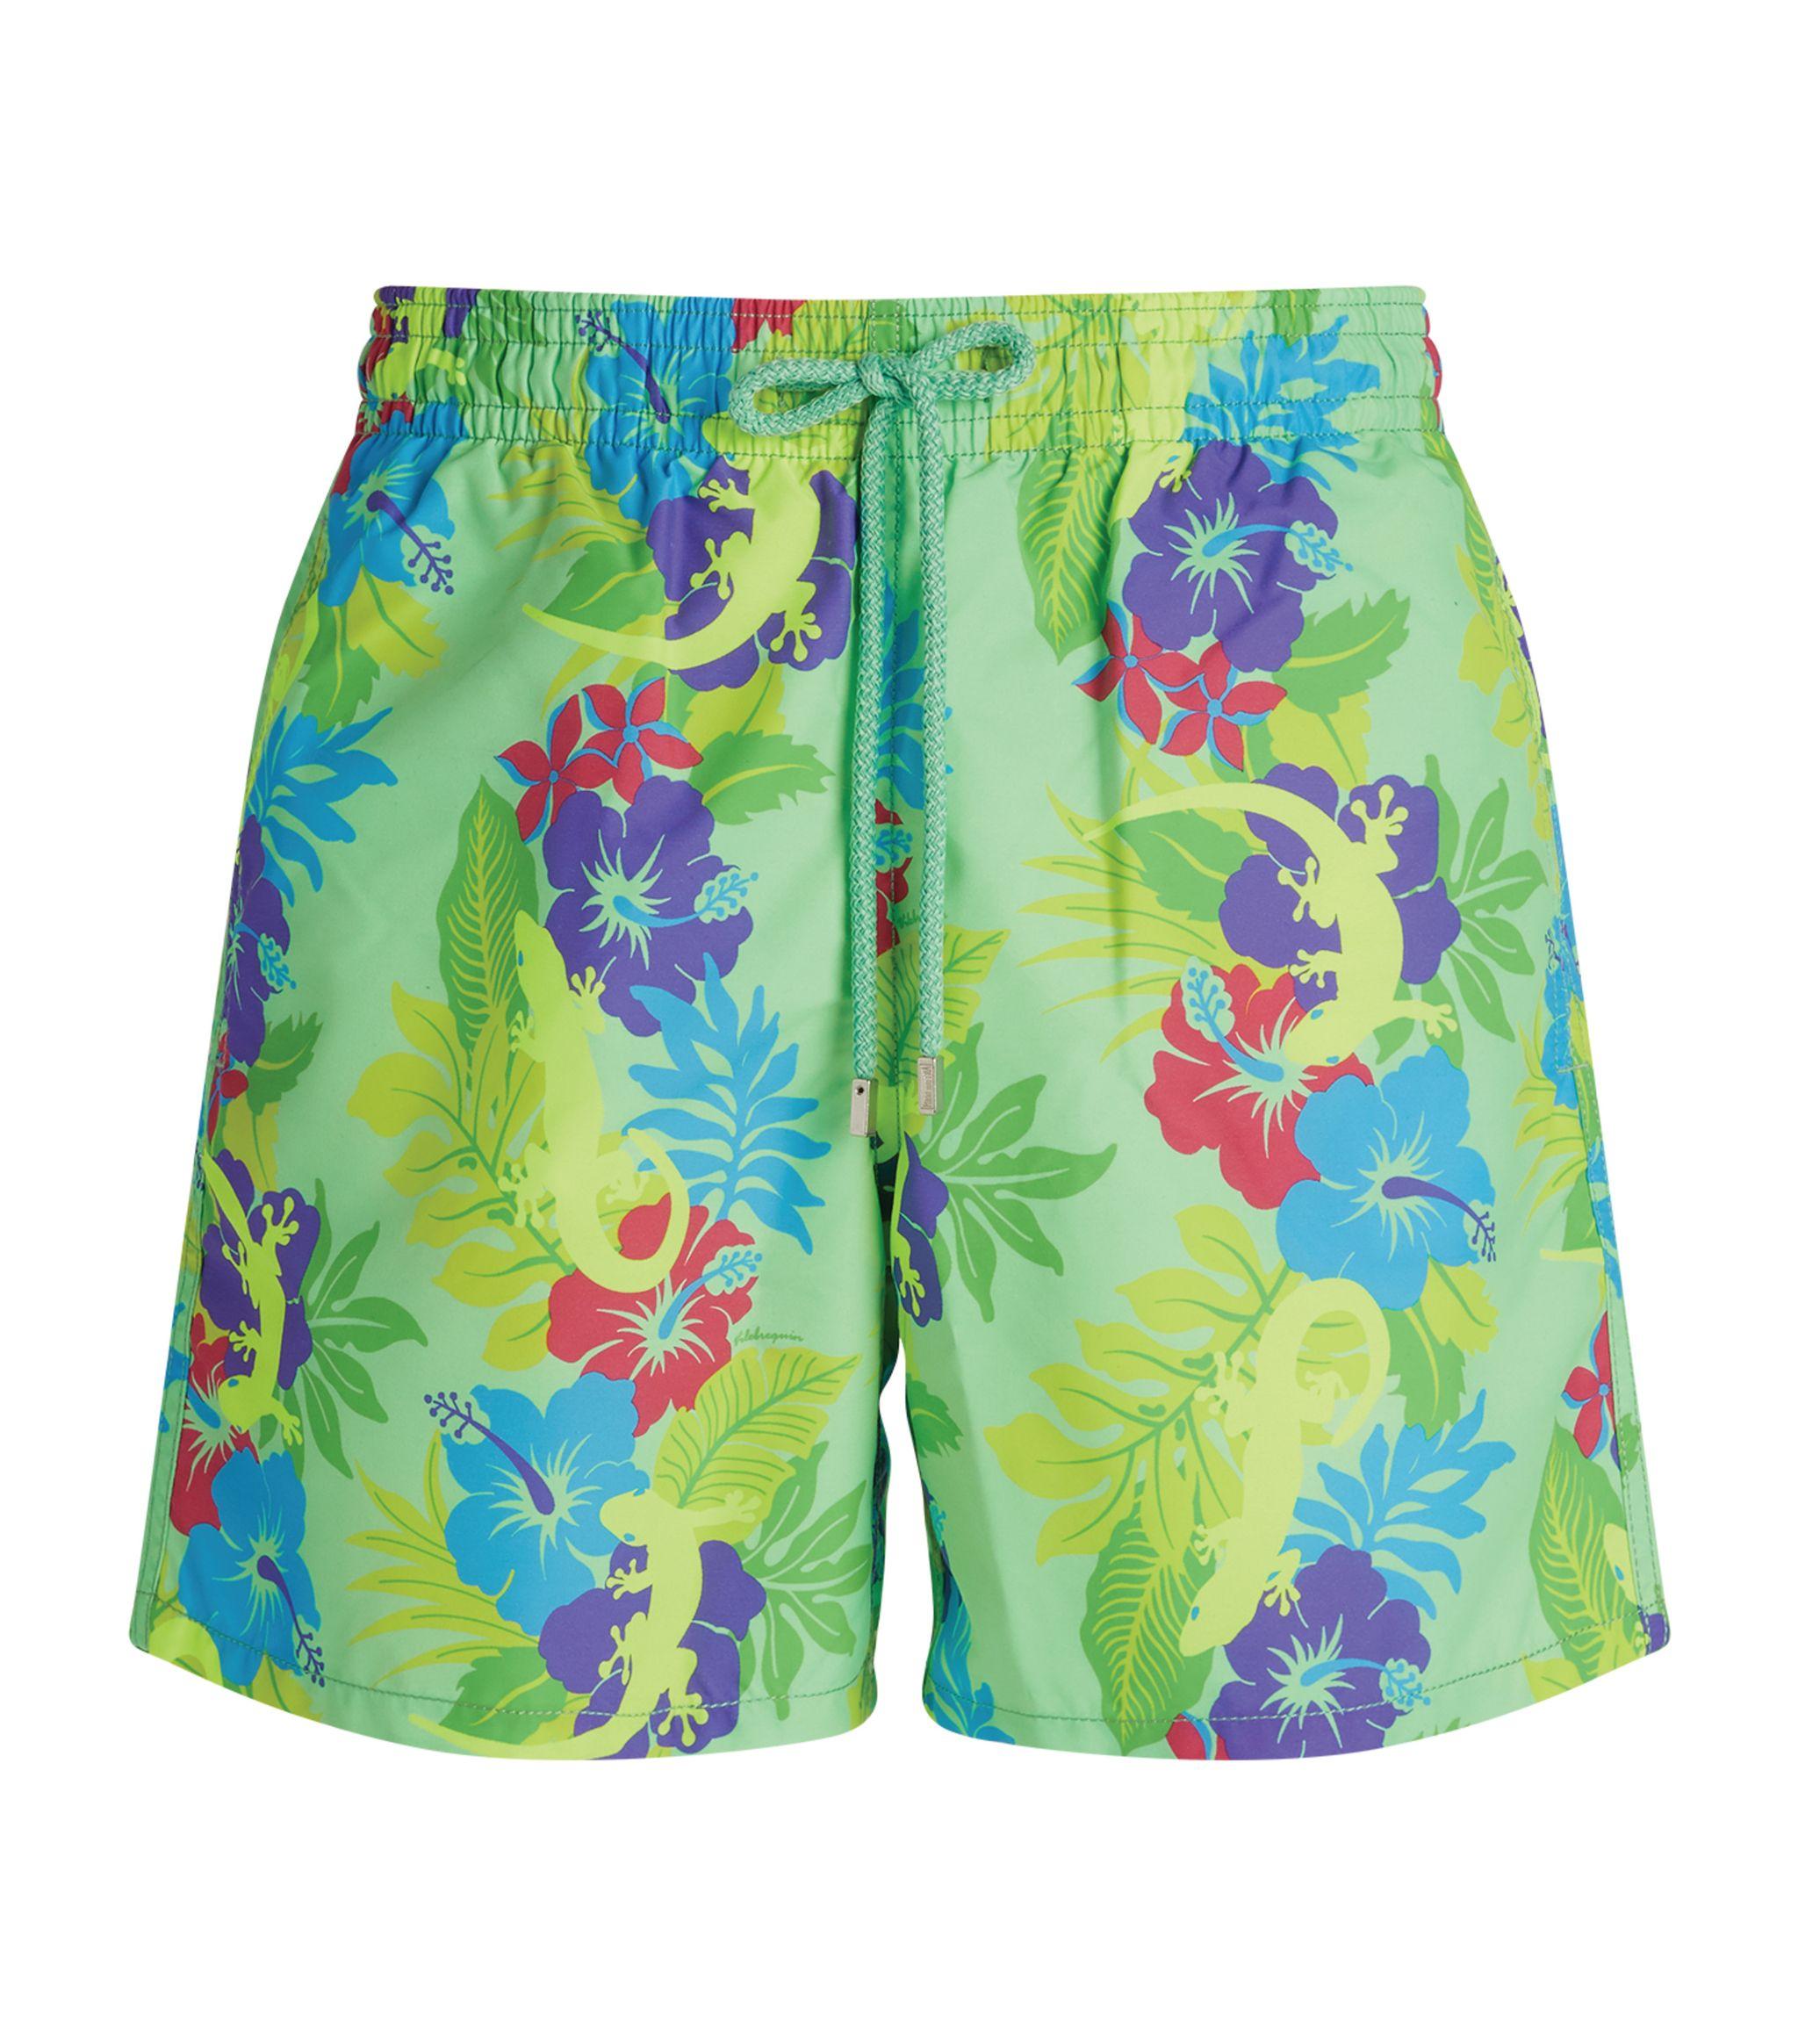 Vilebrequin Synthetic Floral Swim Shorts in Blue for Men - Lyst